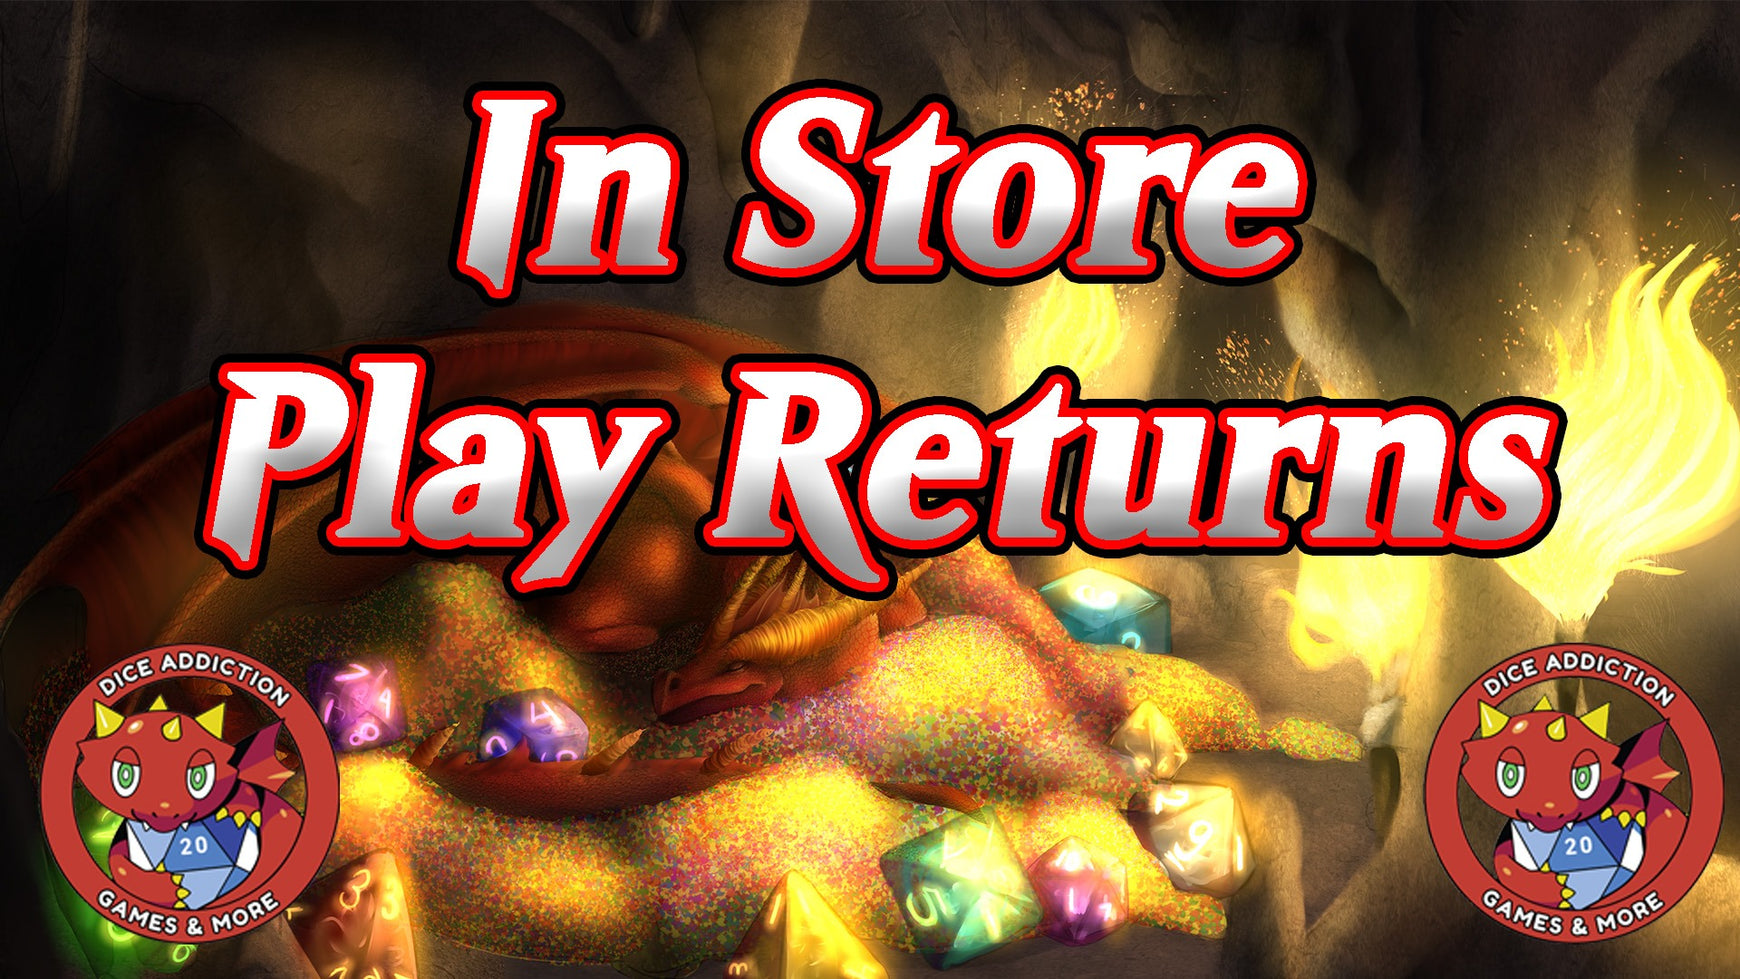 In Store Play Returns.